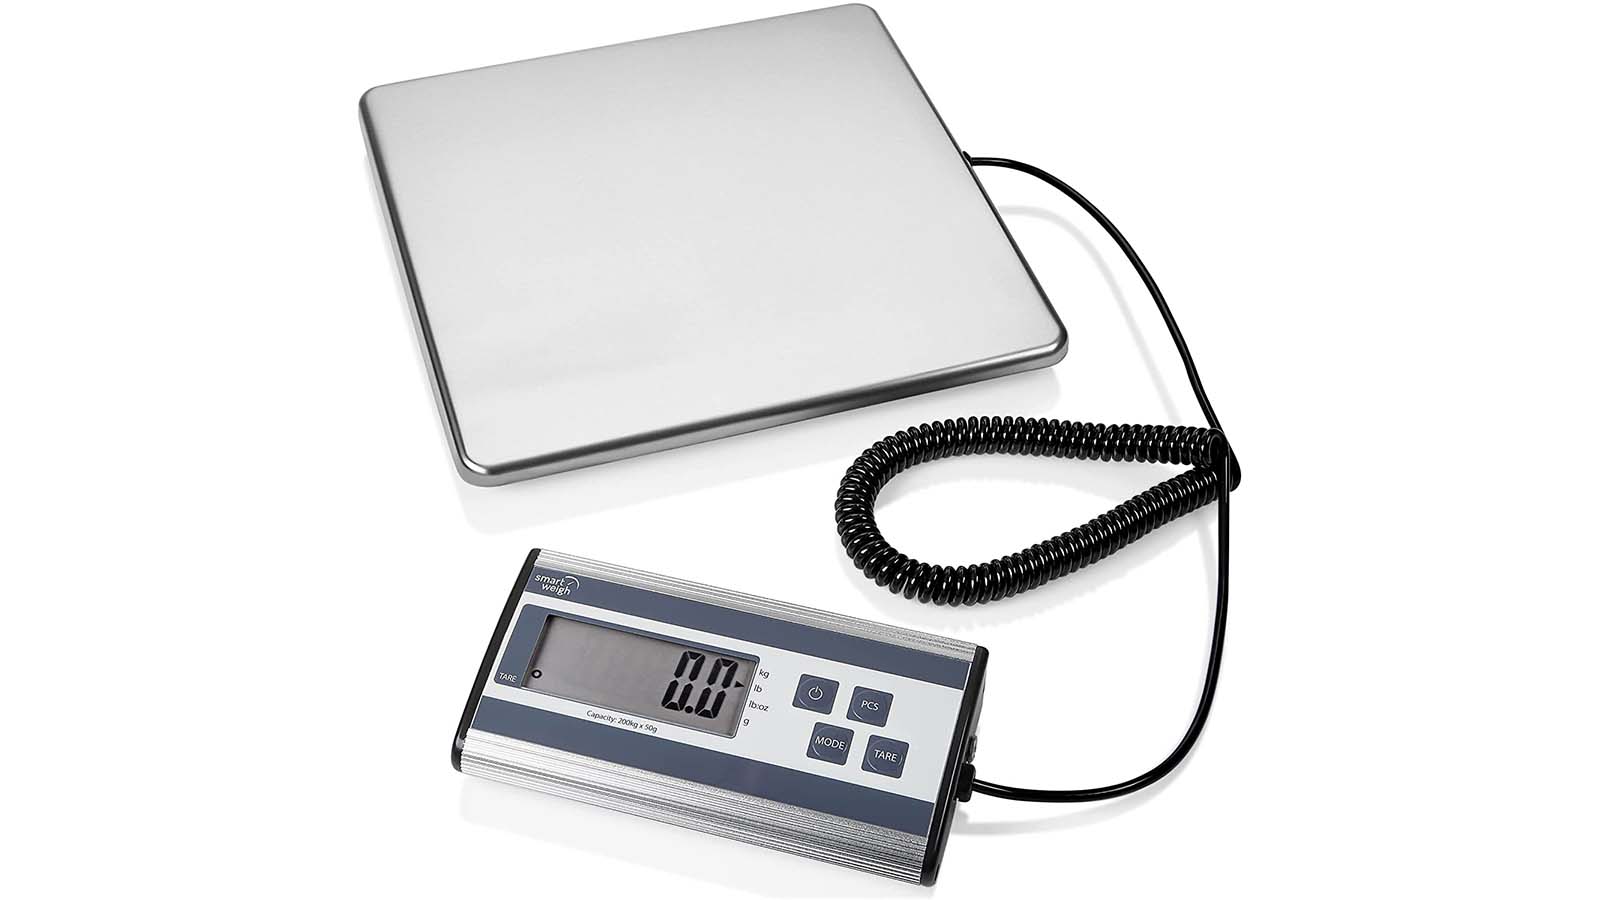 Weigh Cool Portable Luggage Scale - Highest Honor